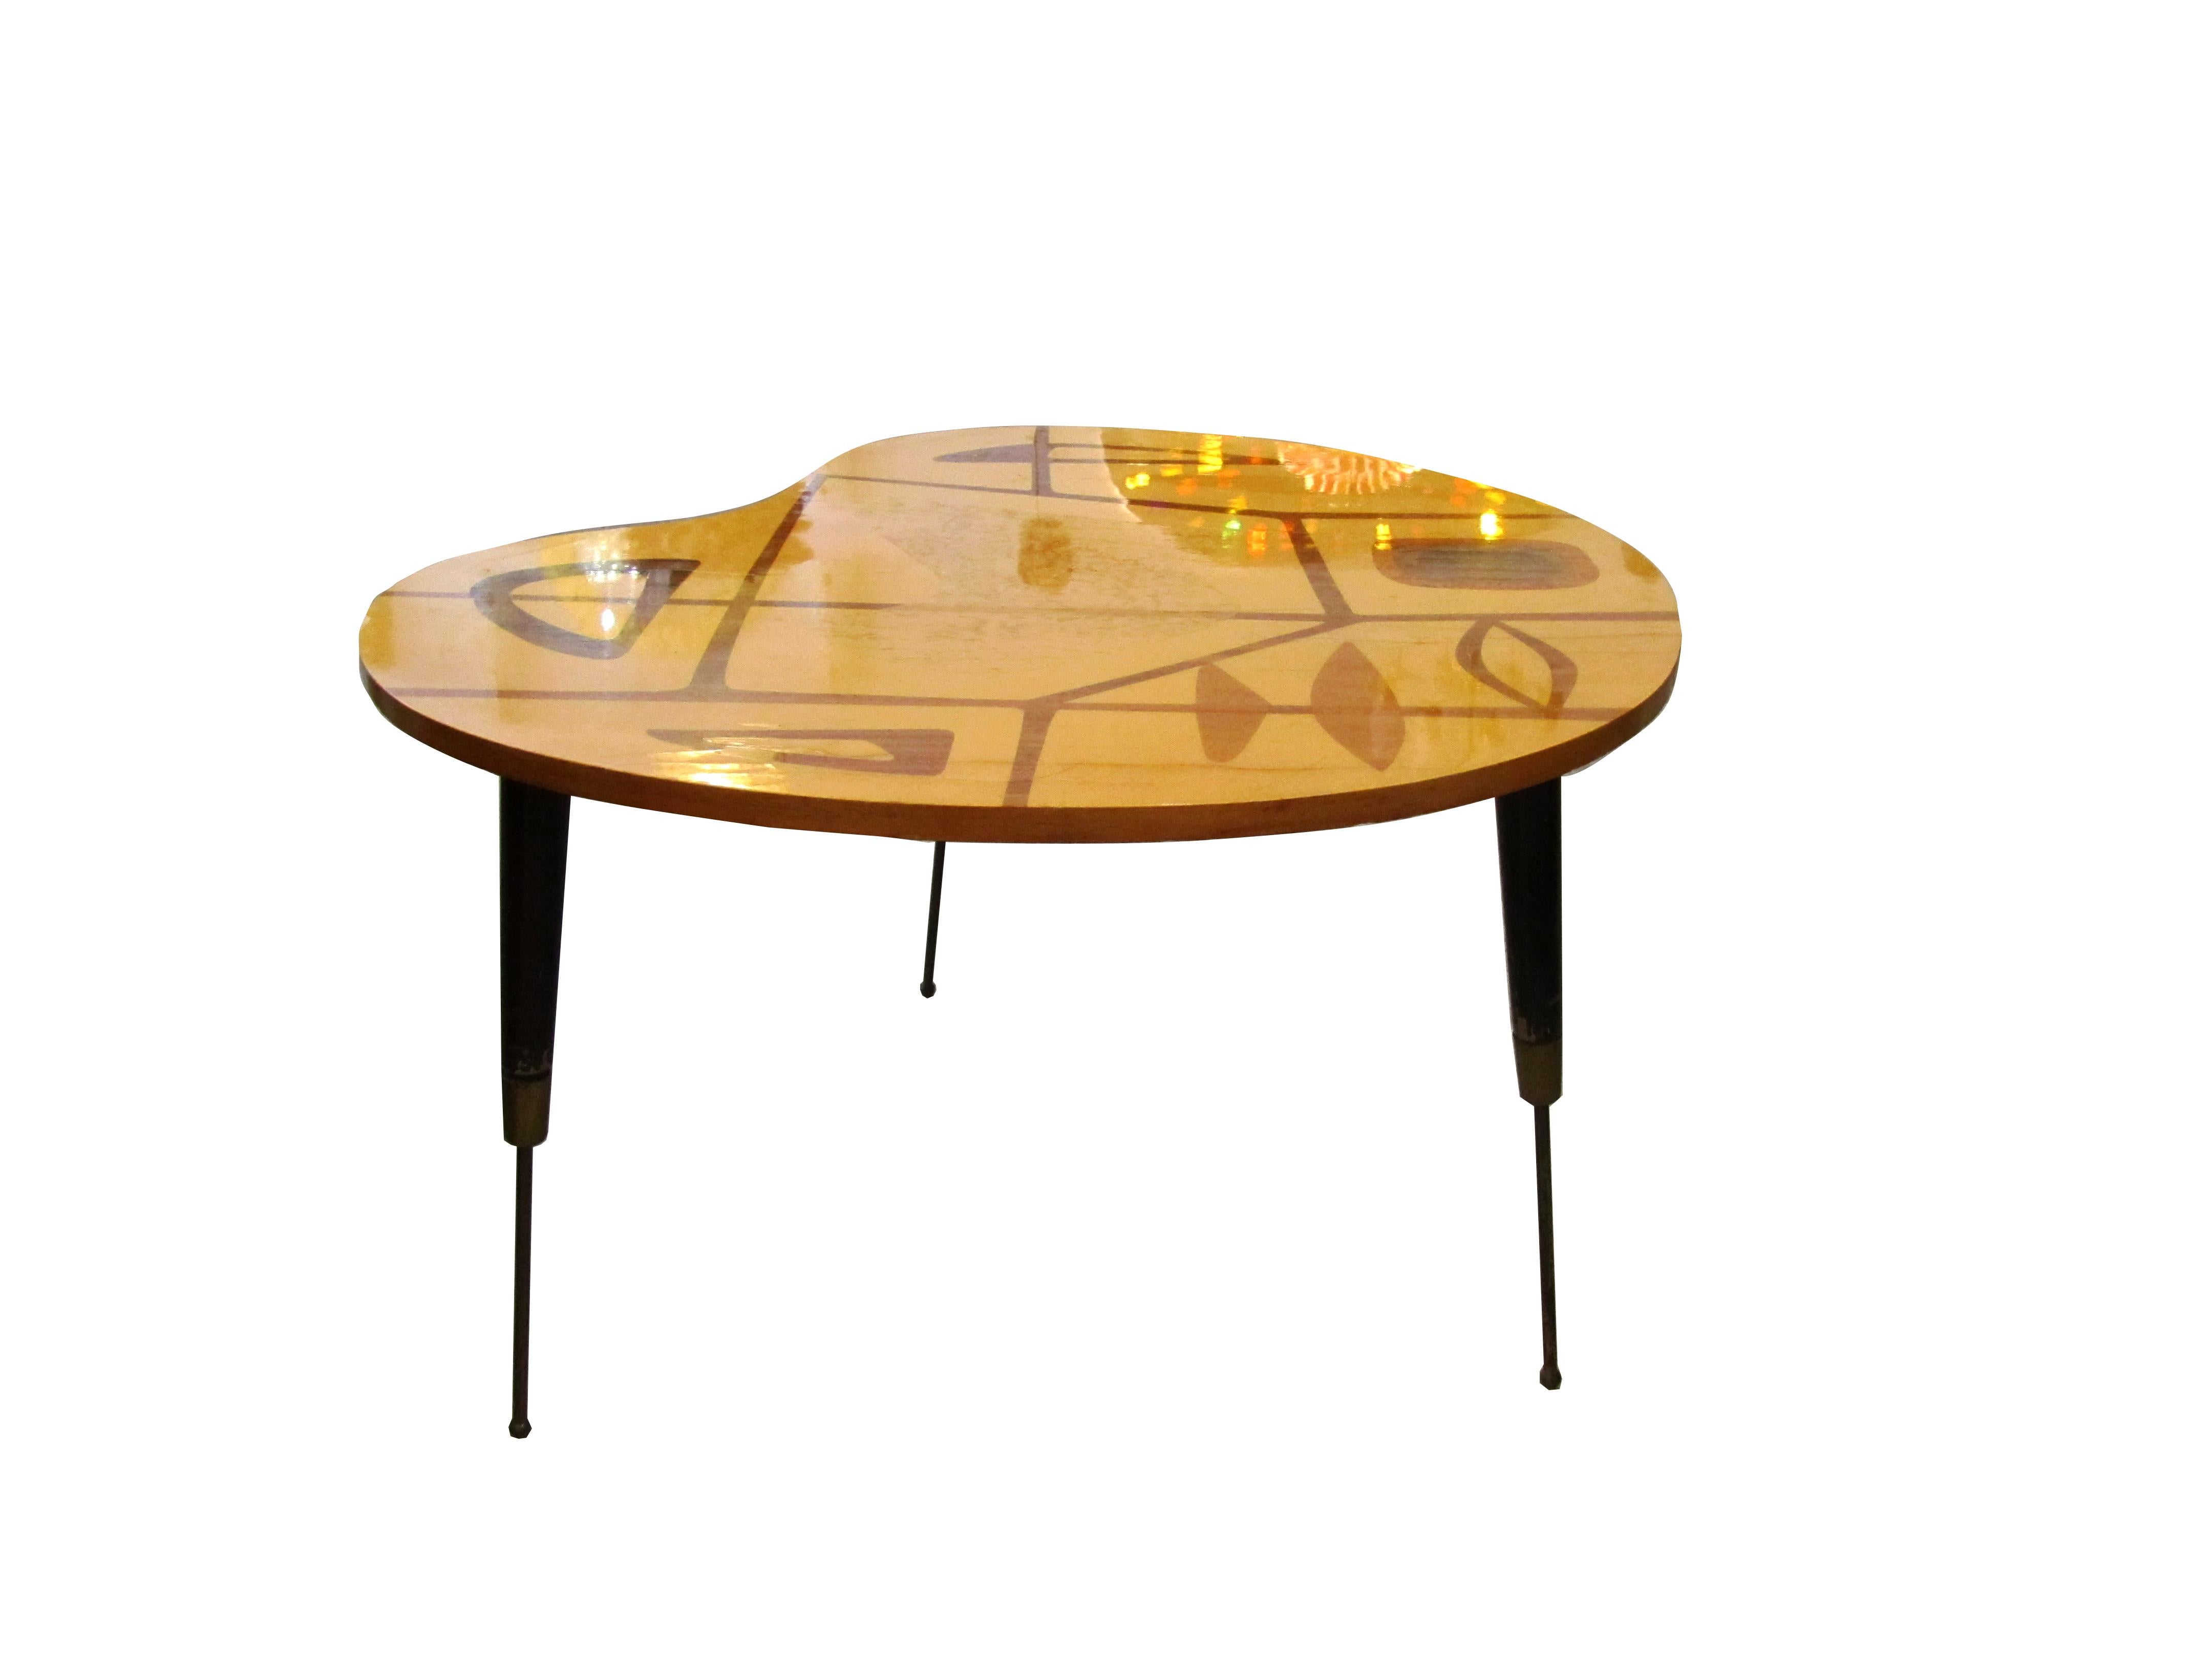 An Italian side table of exotic woods with 3 wooden legs tapering down to a brass cap and slim ball foot. The table top has a slight kidney shape to it. Beautiful inlays throughout.